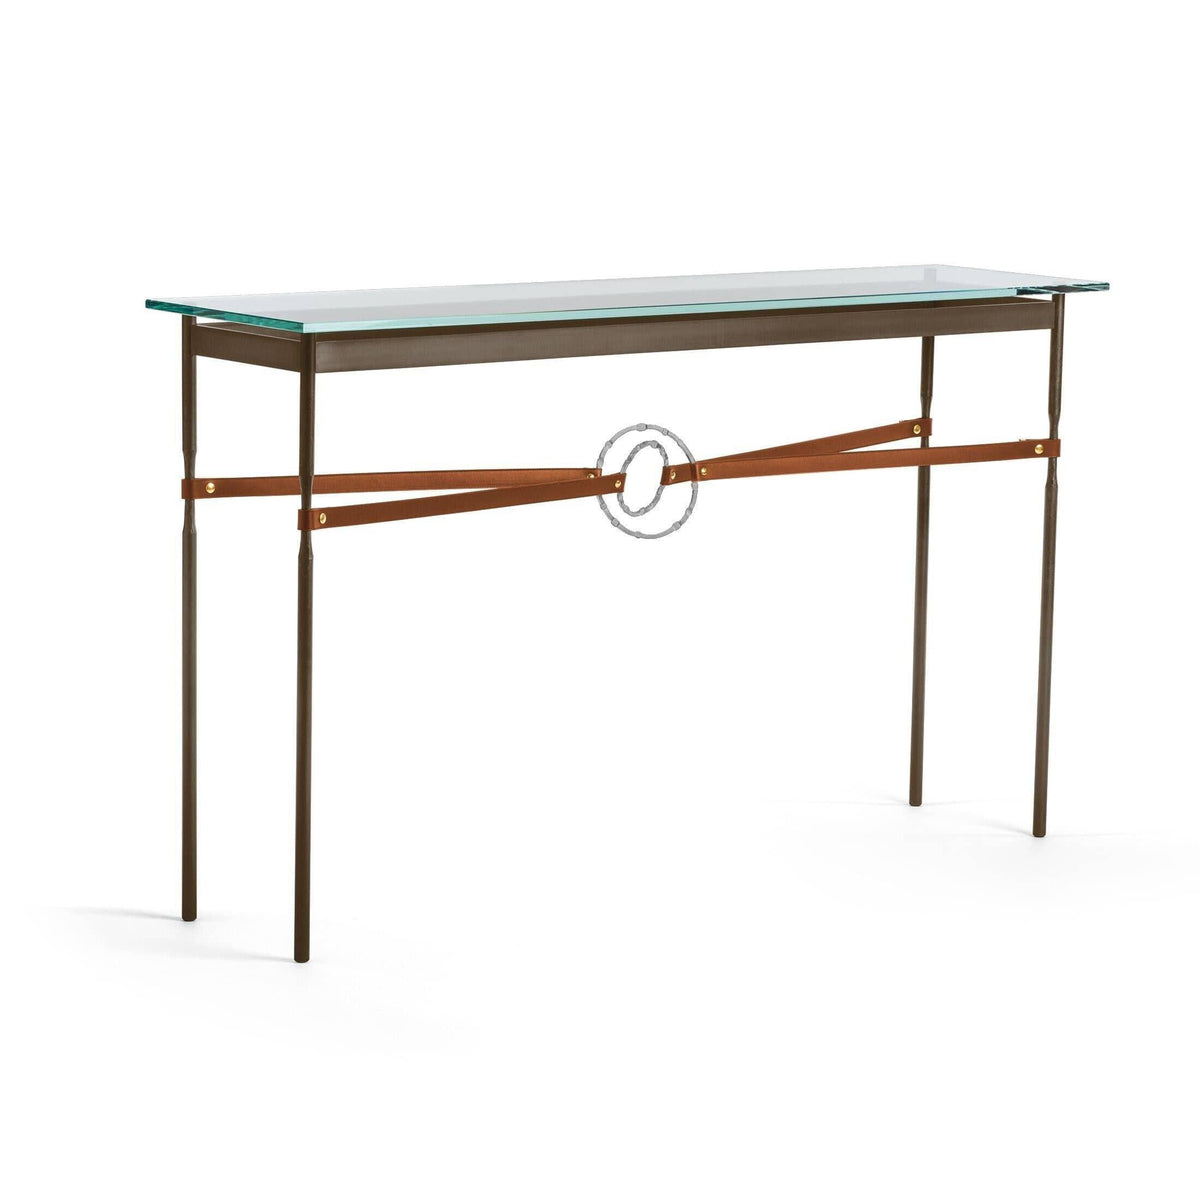 Hubbardton Forge - Equus Chestnut Leather Console Table - 750118-05-82-LC-VA0714 | Montreal Lighting & Hardware